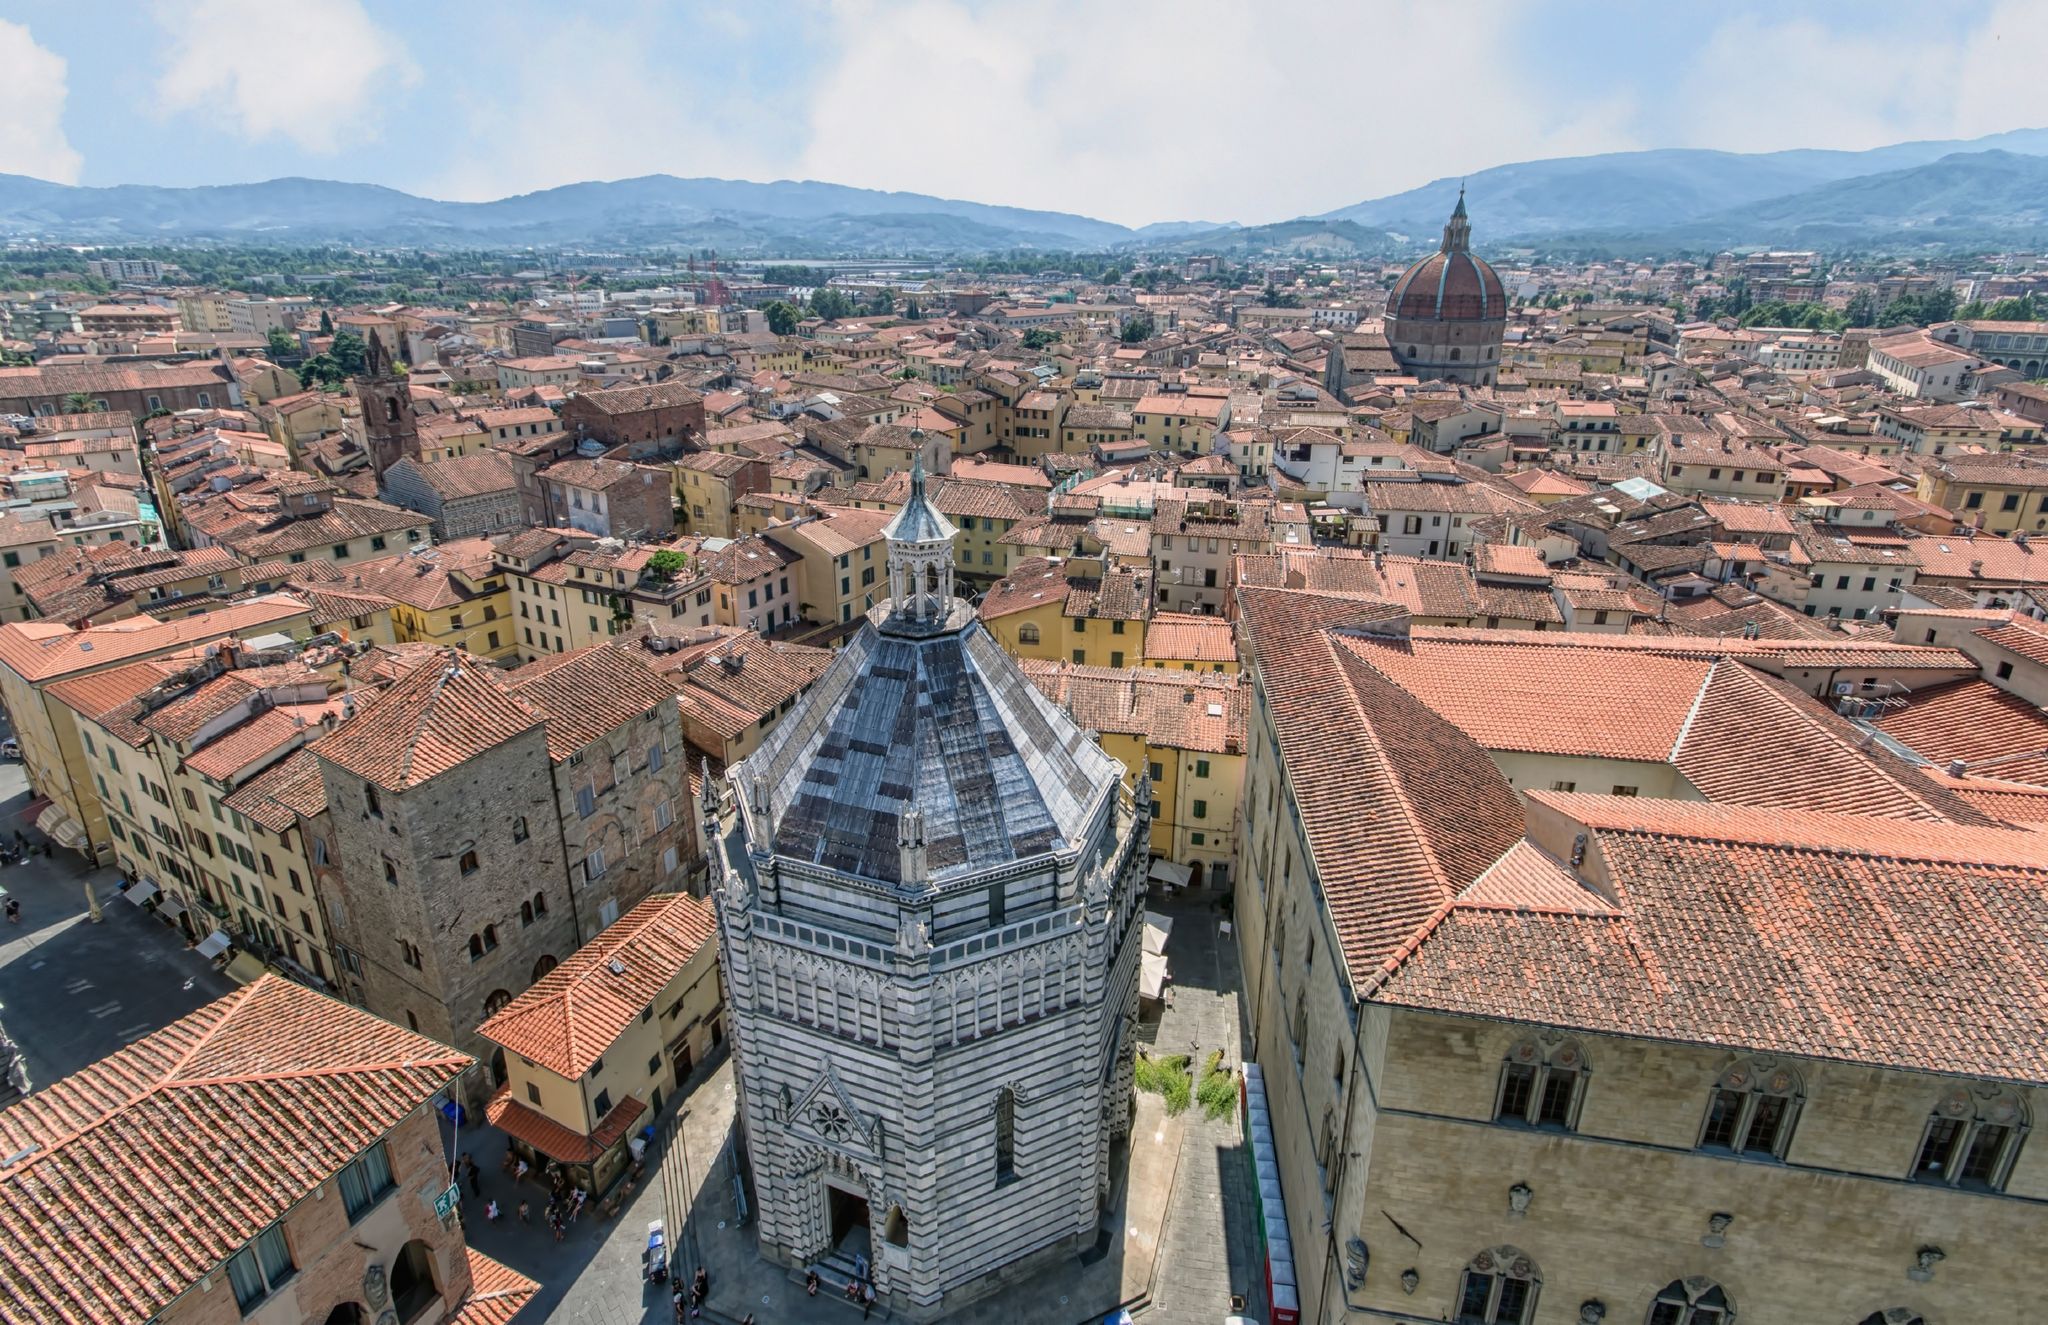 The octagonal 14th-century Baptistery amid the red pan-tiled roofs of Pistoia, Italy 

